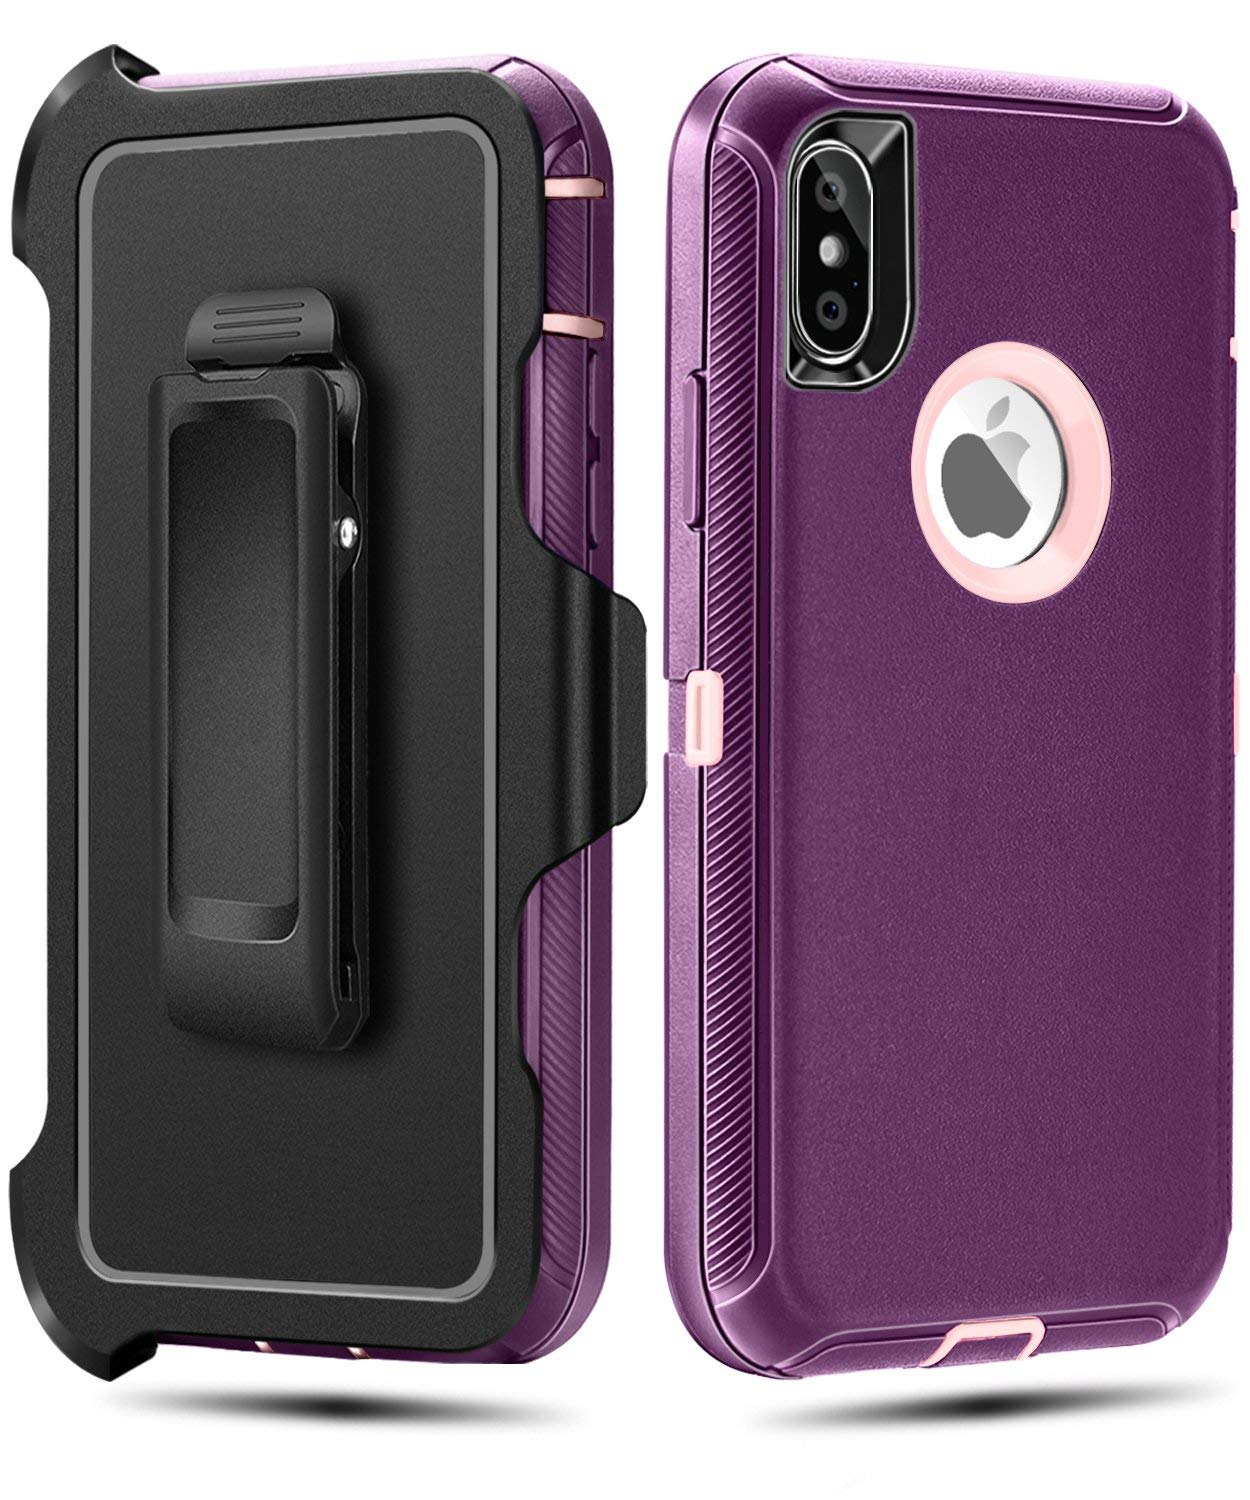 iPhone XS,iPhone X Case,FOGEEK Belt Clip Holster Heavy Duty Kickstand Cover [Support Wireless Charging] [Dust-Proof] [Shockproof] Compatible for Apple iPhone XS, iPhone X, 5.8 inch  (Dark Violet/Pink)